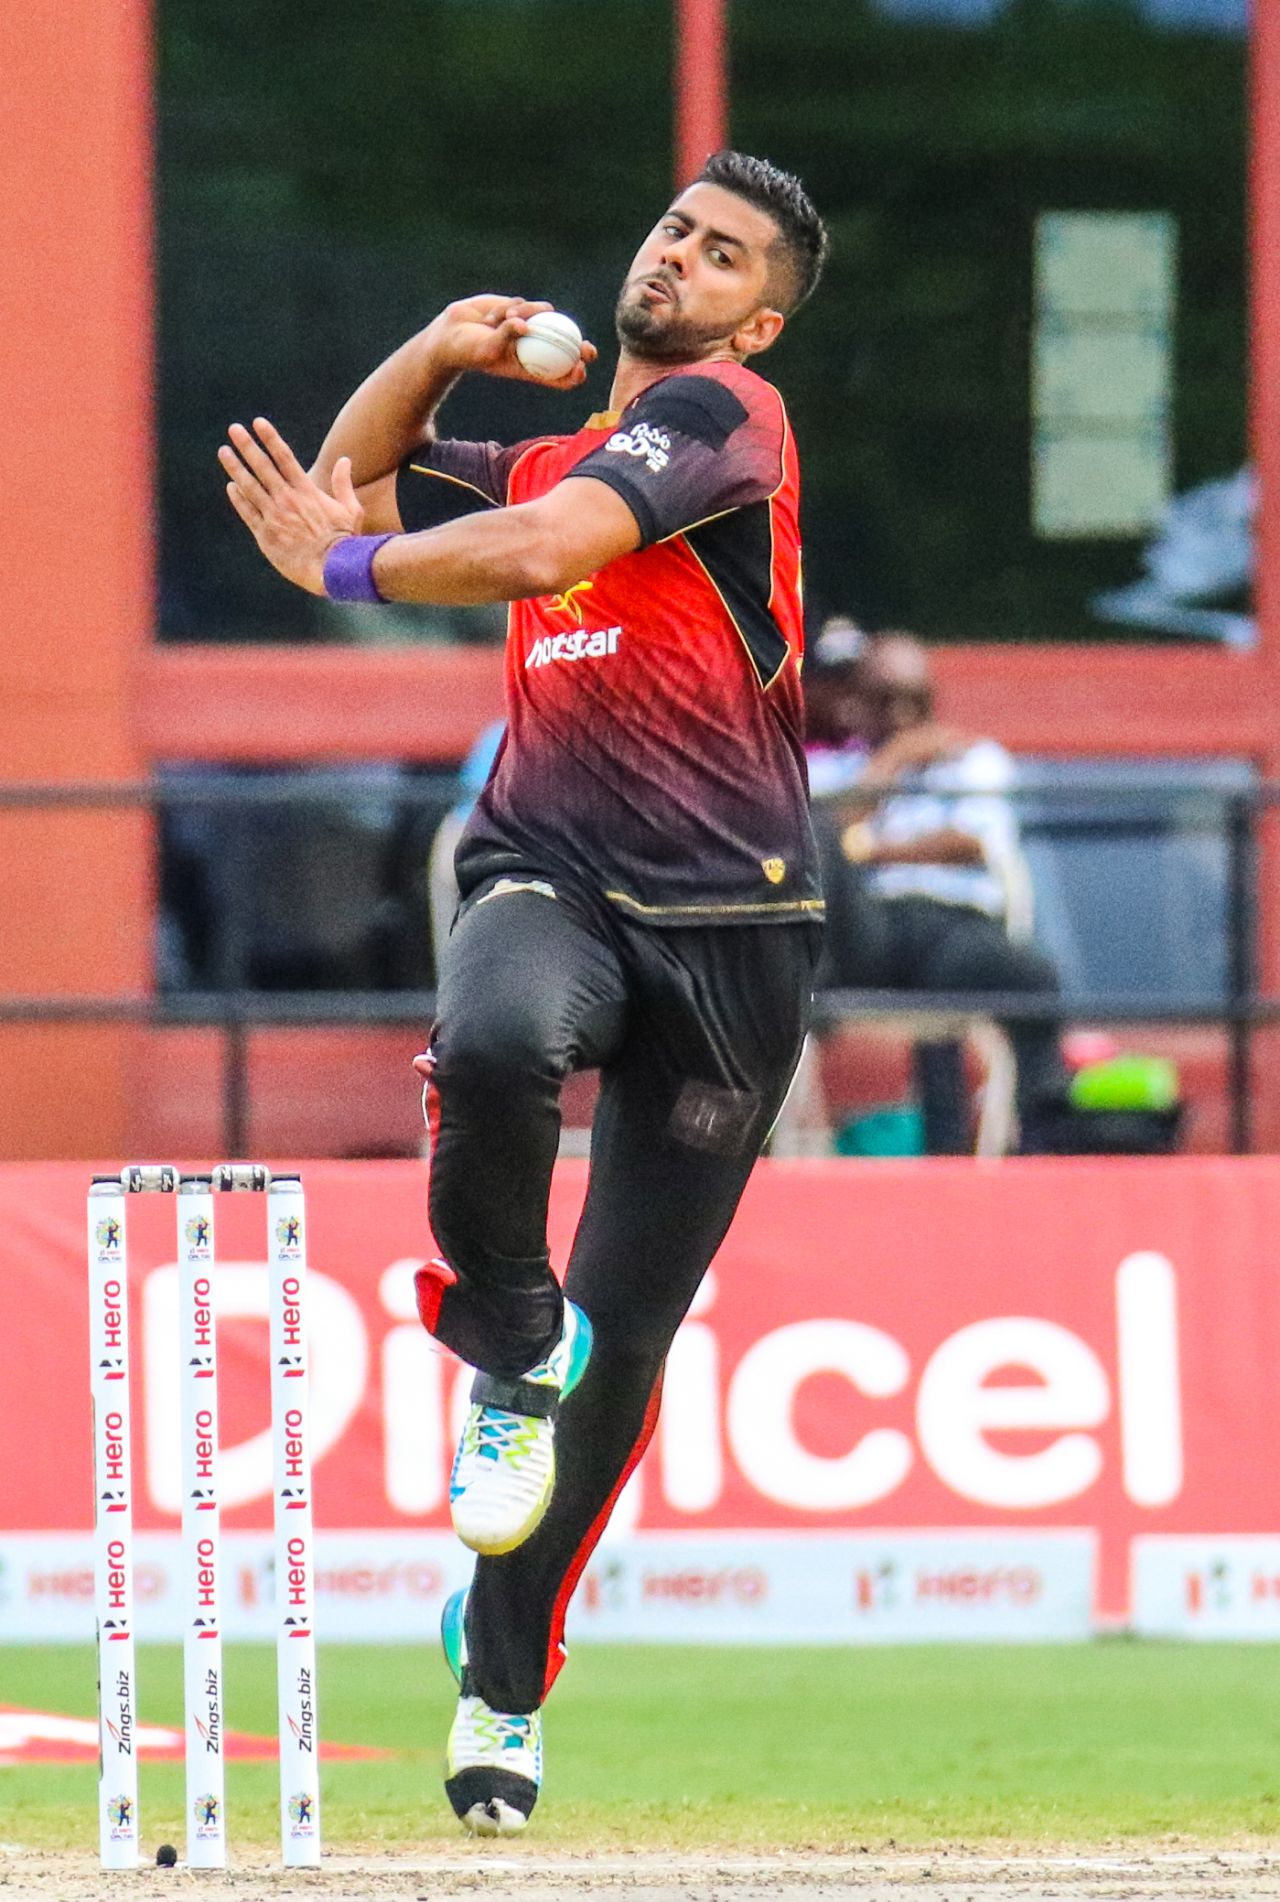 Ali Khan has been a leading force with the ball for Trinbago Knight Riders, Jamaica Tallawahs v Trinbago Knight Riders, CPL 2018, Lauderhill, August 19, 2018